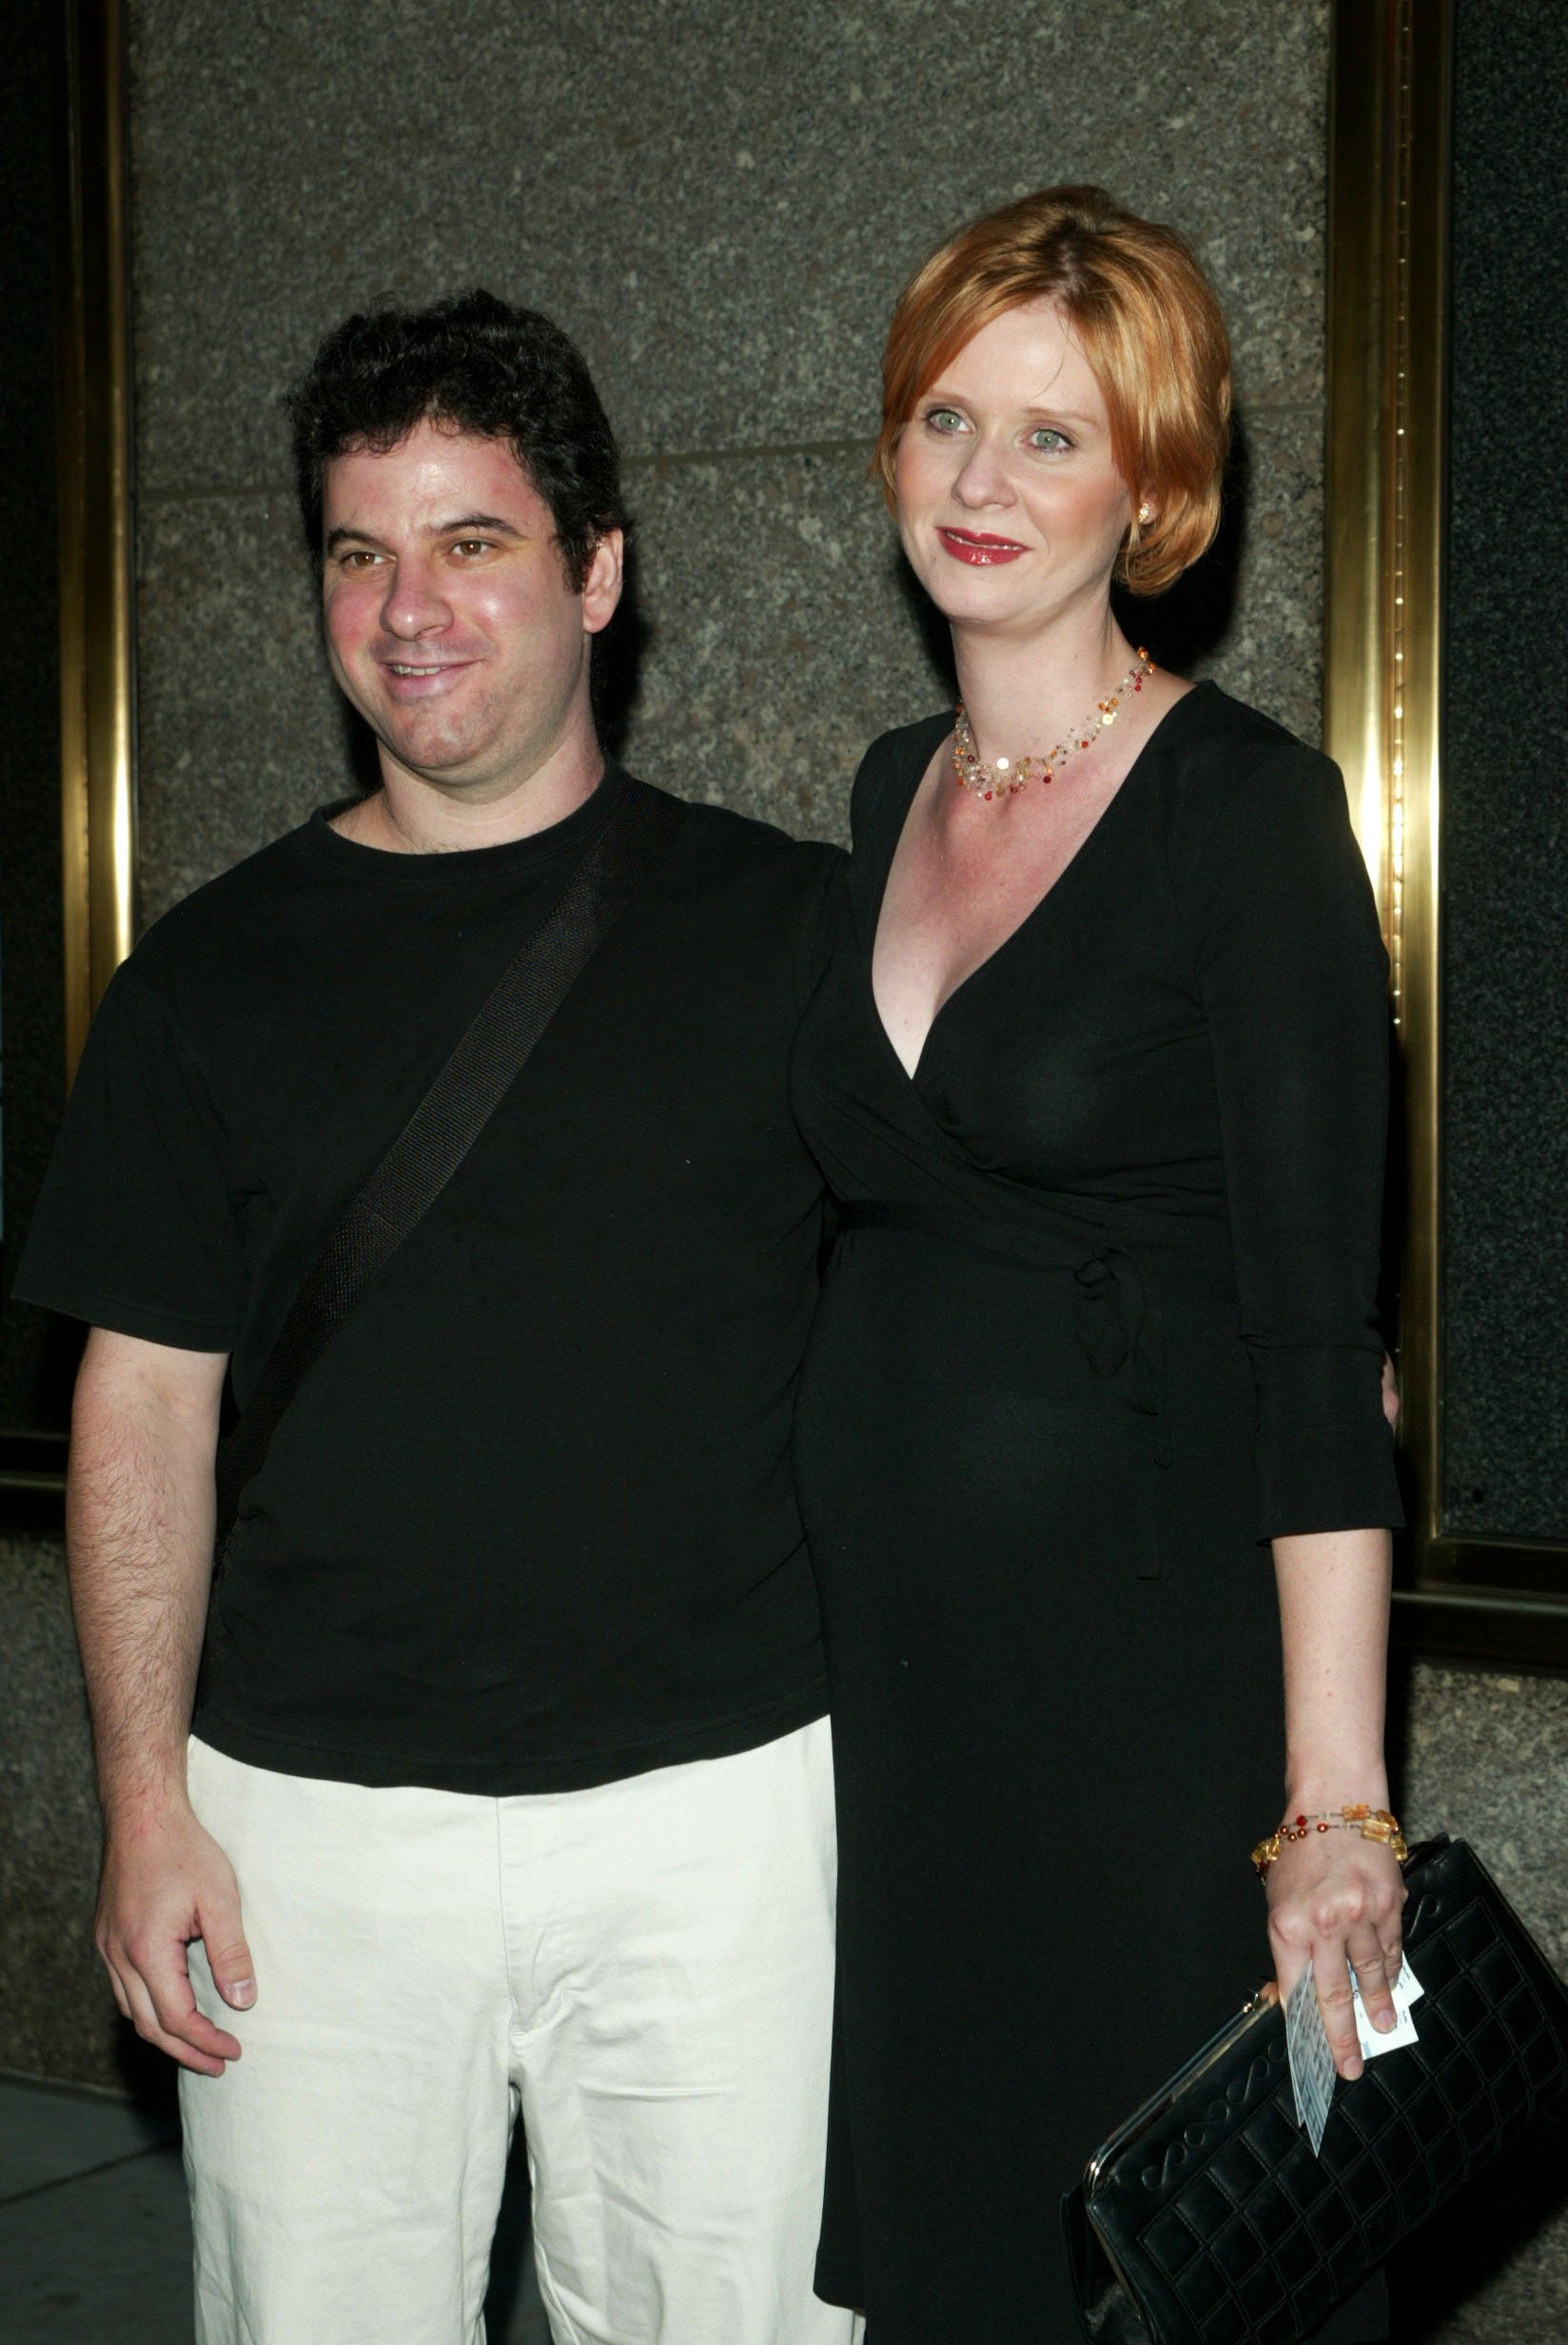 Cynthia Nixon and Danny Mozes attend the world premiere of the fourth season of HBO's "The Sopranos" on September 5, 2002, in New York City on September 5, 2002 | Source: Getty Images